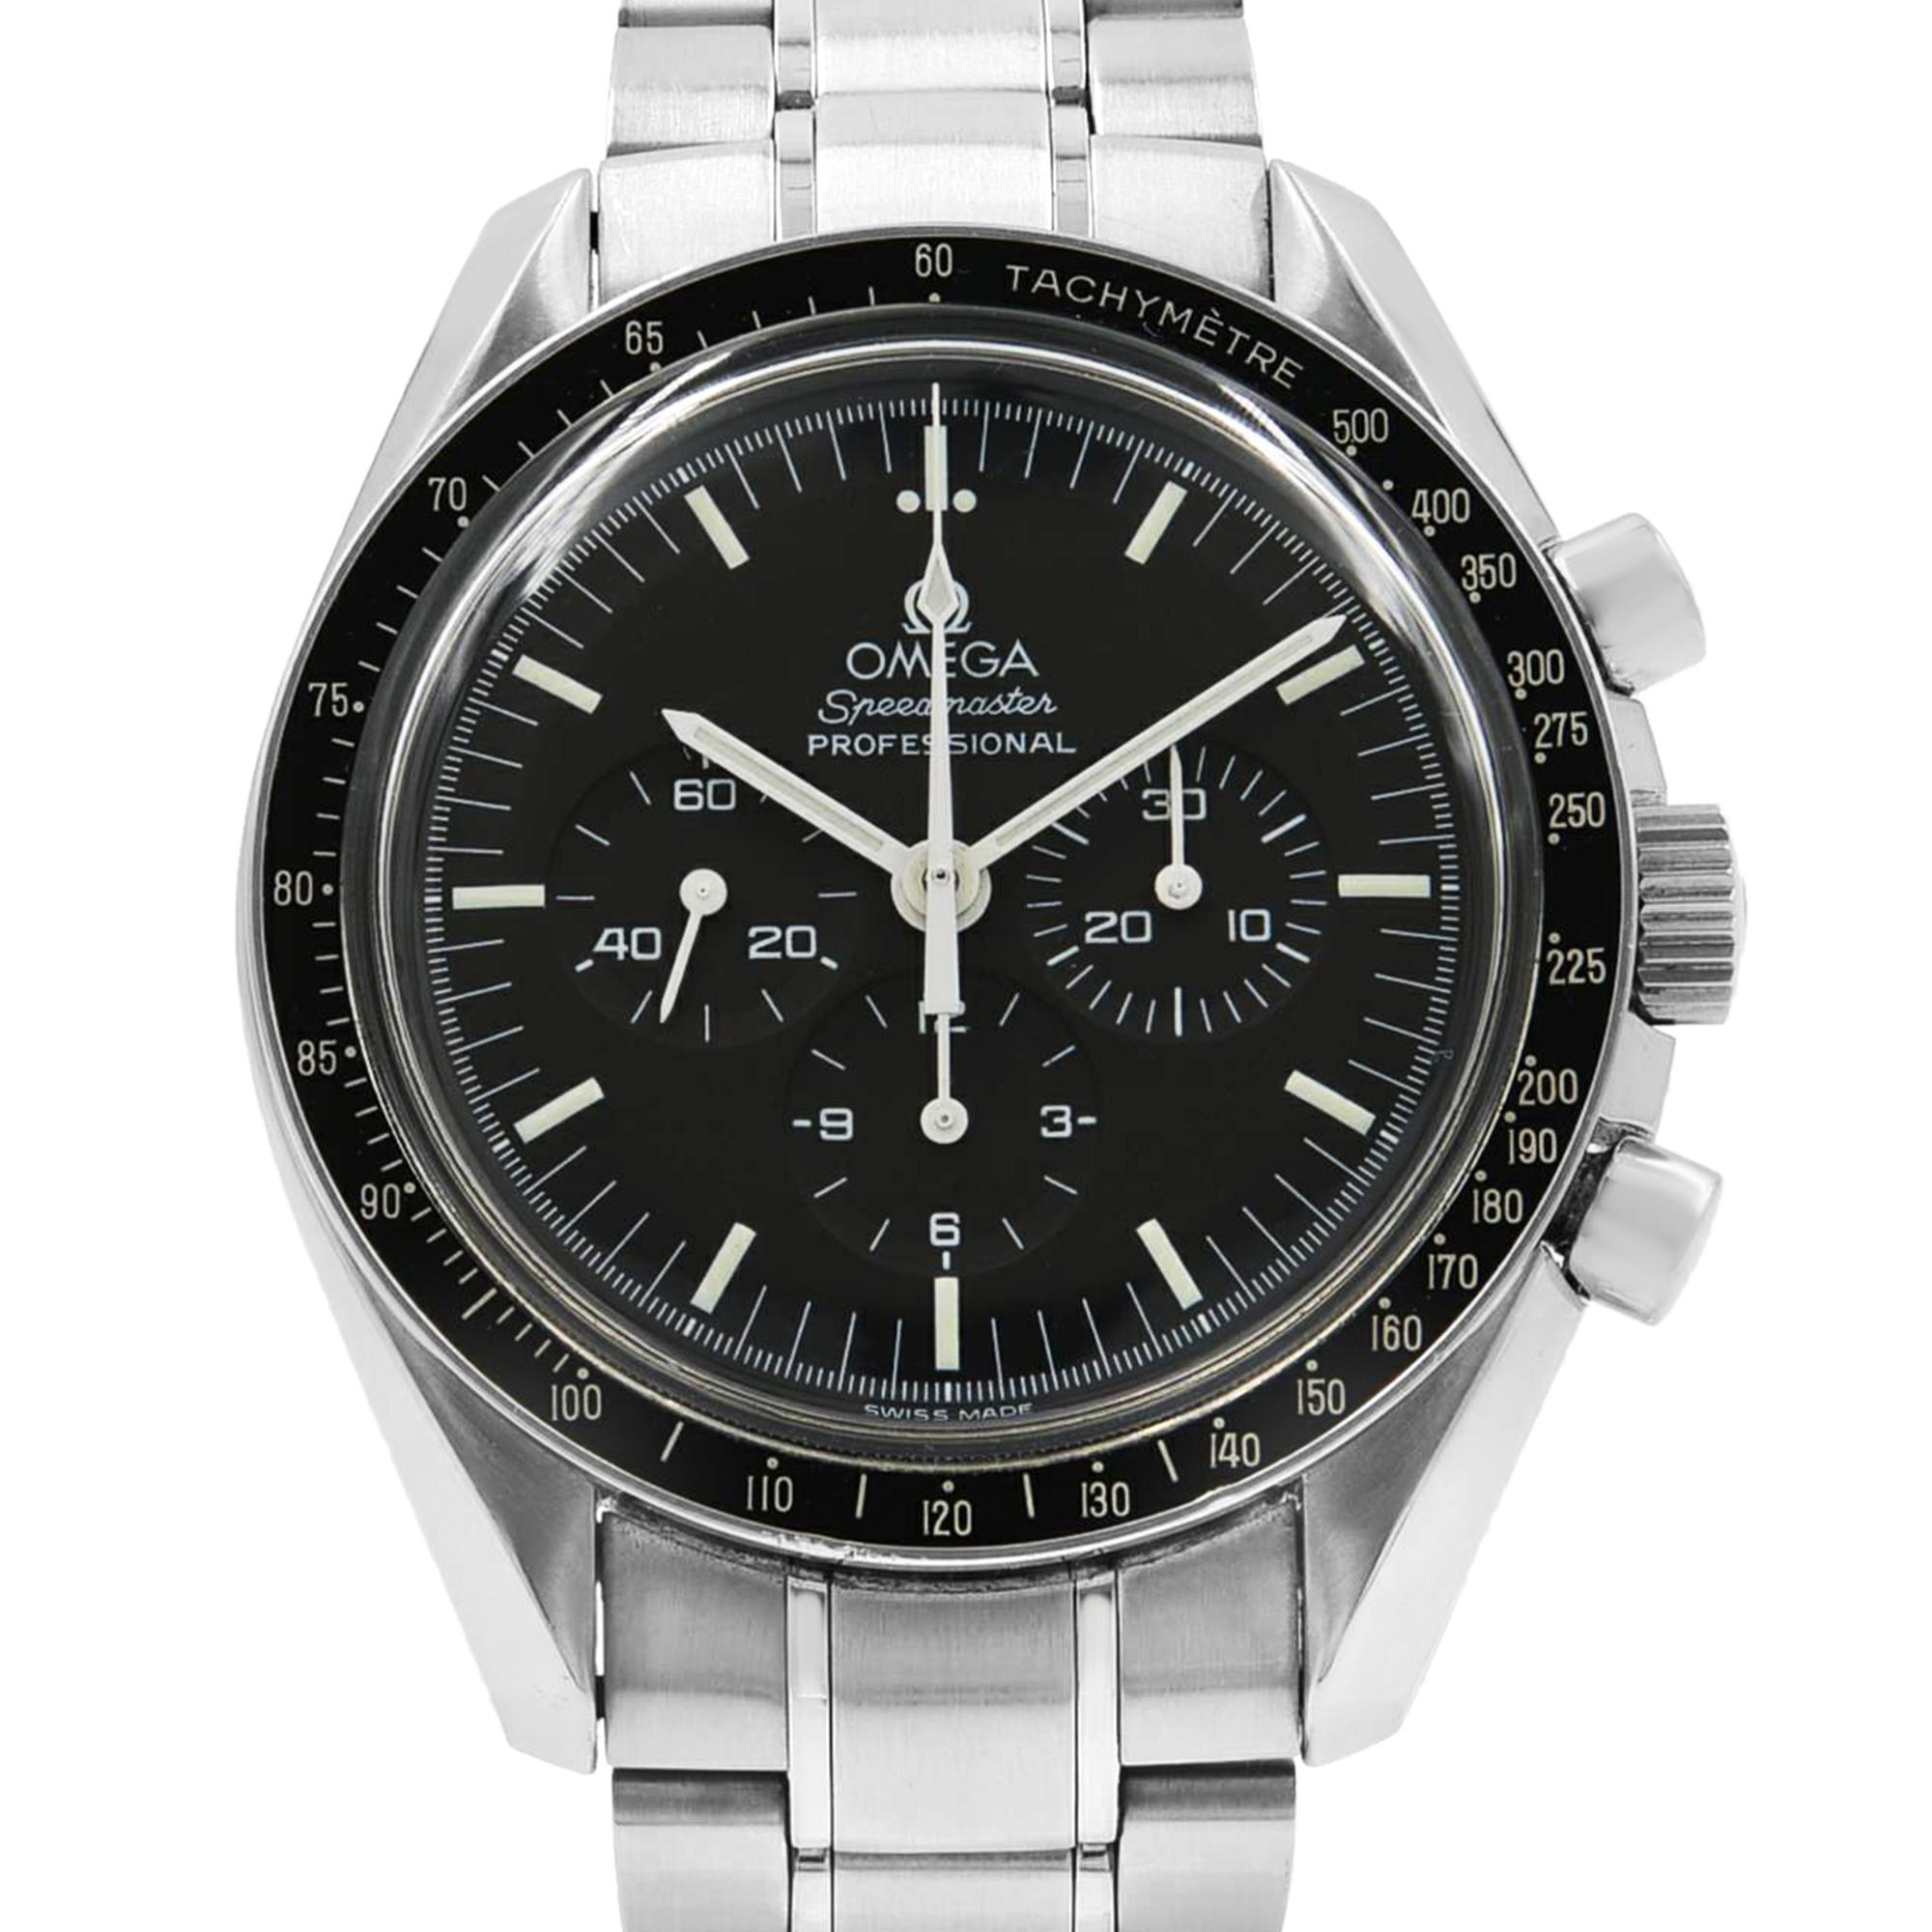 Pre Owned Omega Speedmaster Reduced Steel Black Dial Automatic Men's Watch 3510.50.00. This Beautiful Timepiece Features: Stainless Steel Case & Bracelet Fixed Stainless Steel Bezel with Black Tachymeter Scale Top Ring, Black Dial with Luminous